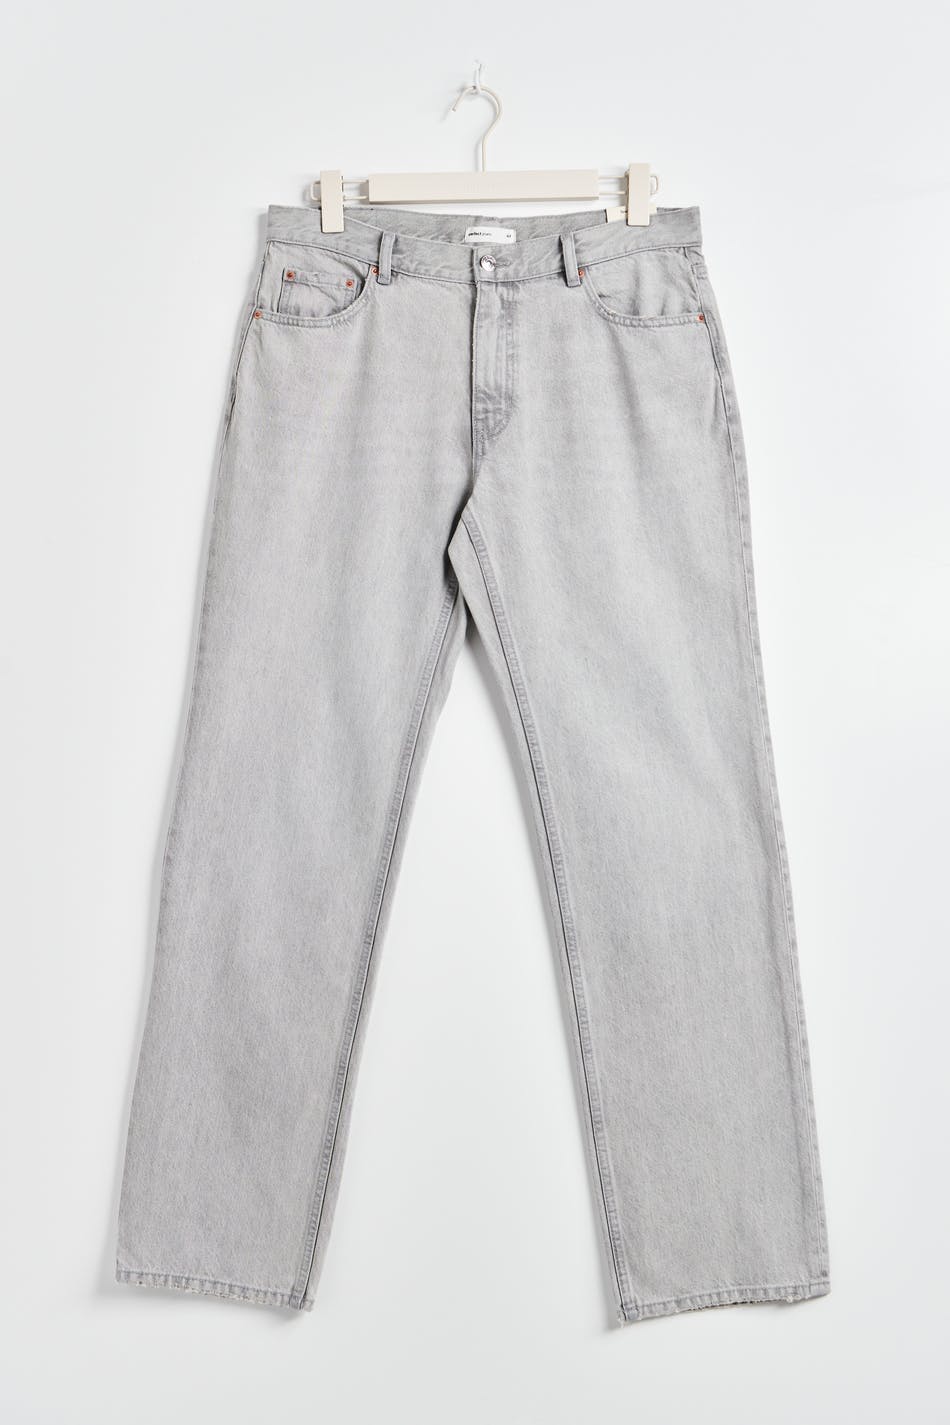 Gina Tricot - Low straight tall jeans - low-straight-jeans - Grey - 34 - Female